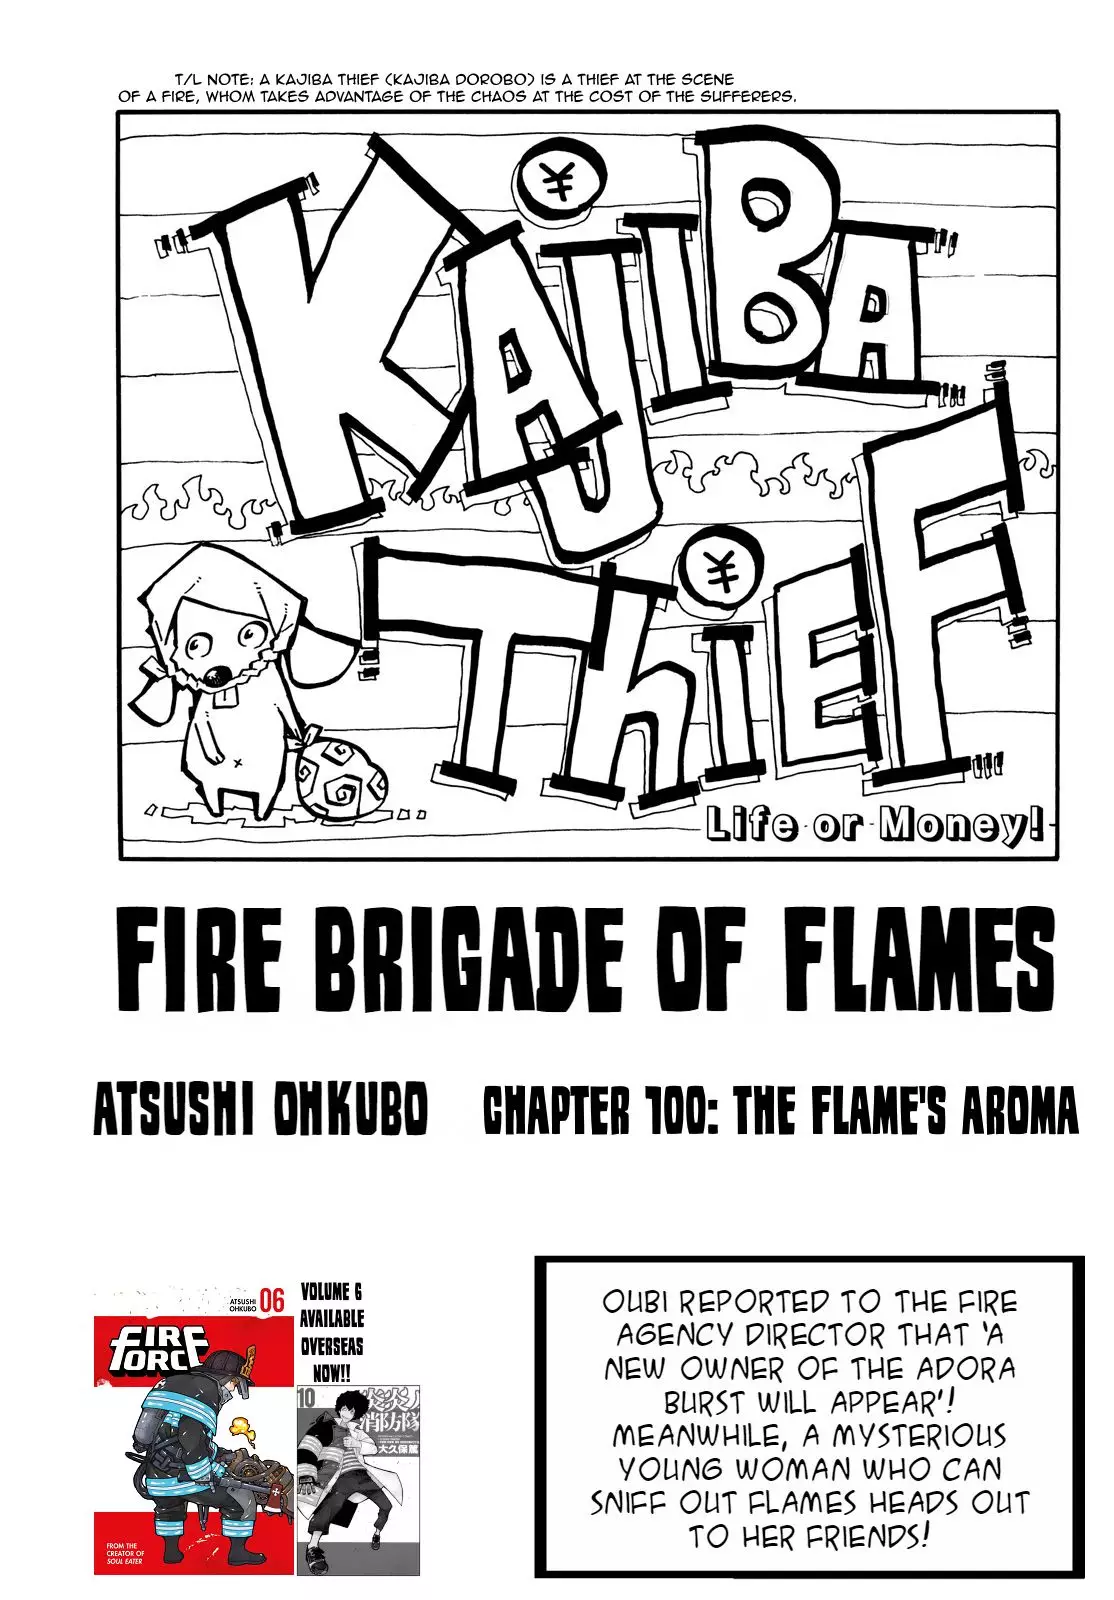 Fire Brigade of Flames - 100 page 001